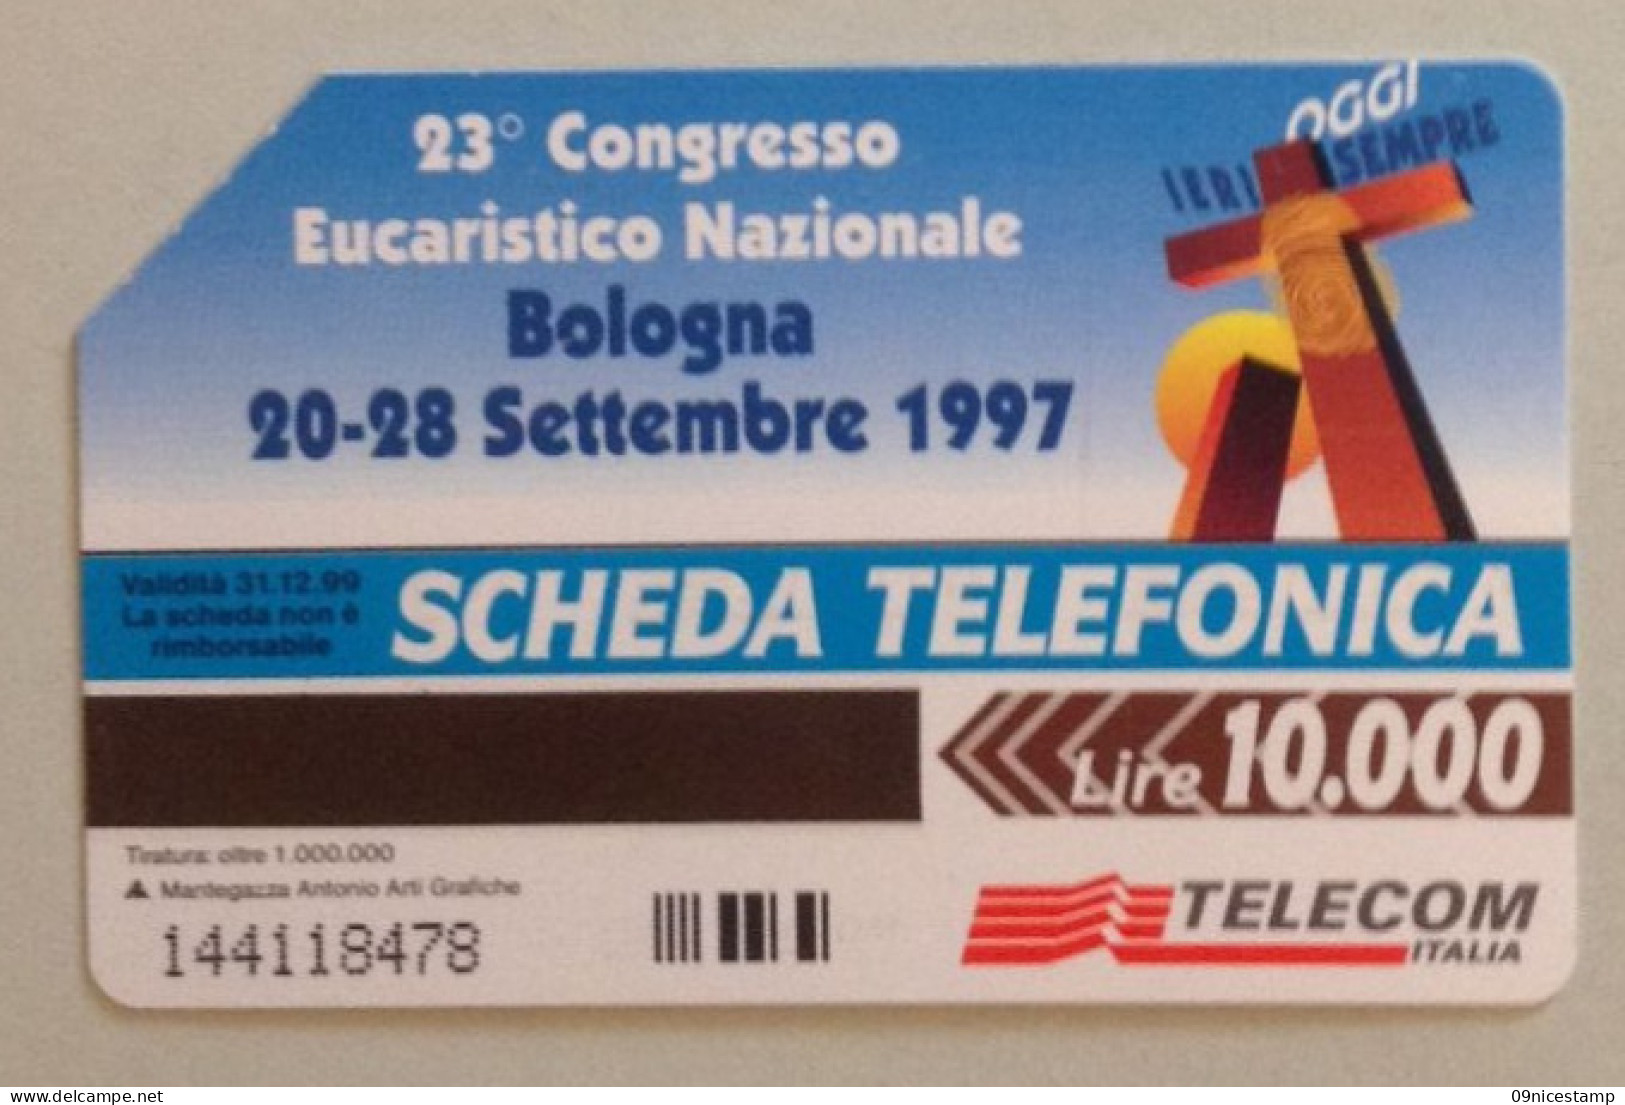 Italy, Telephonecard, Empty And Used - Publiques Ordinaires